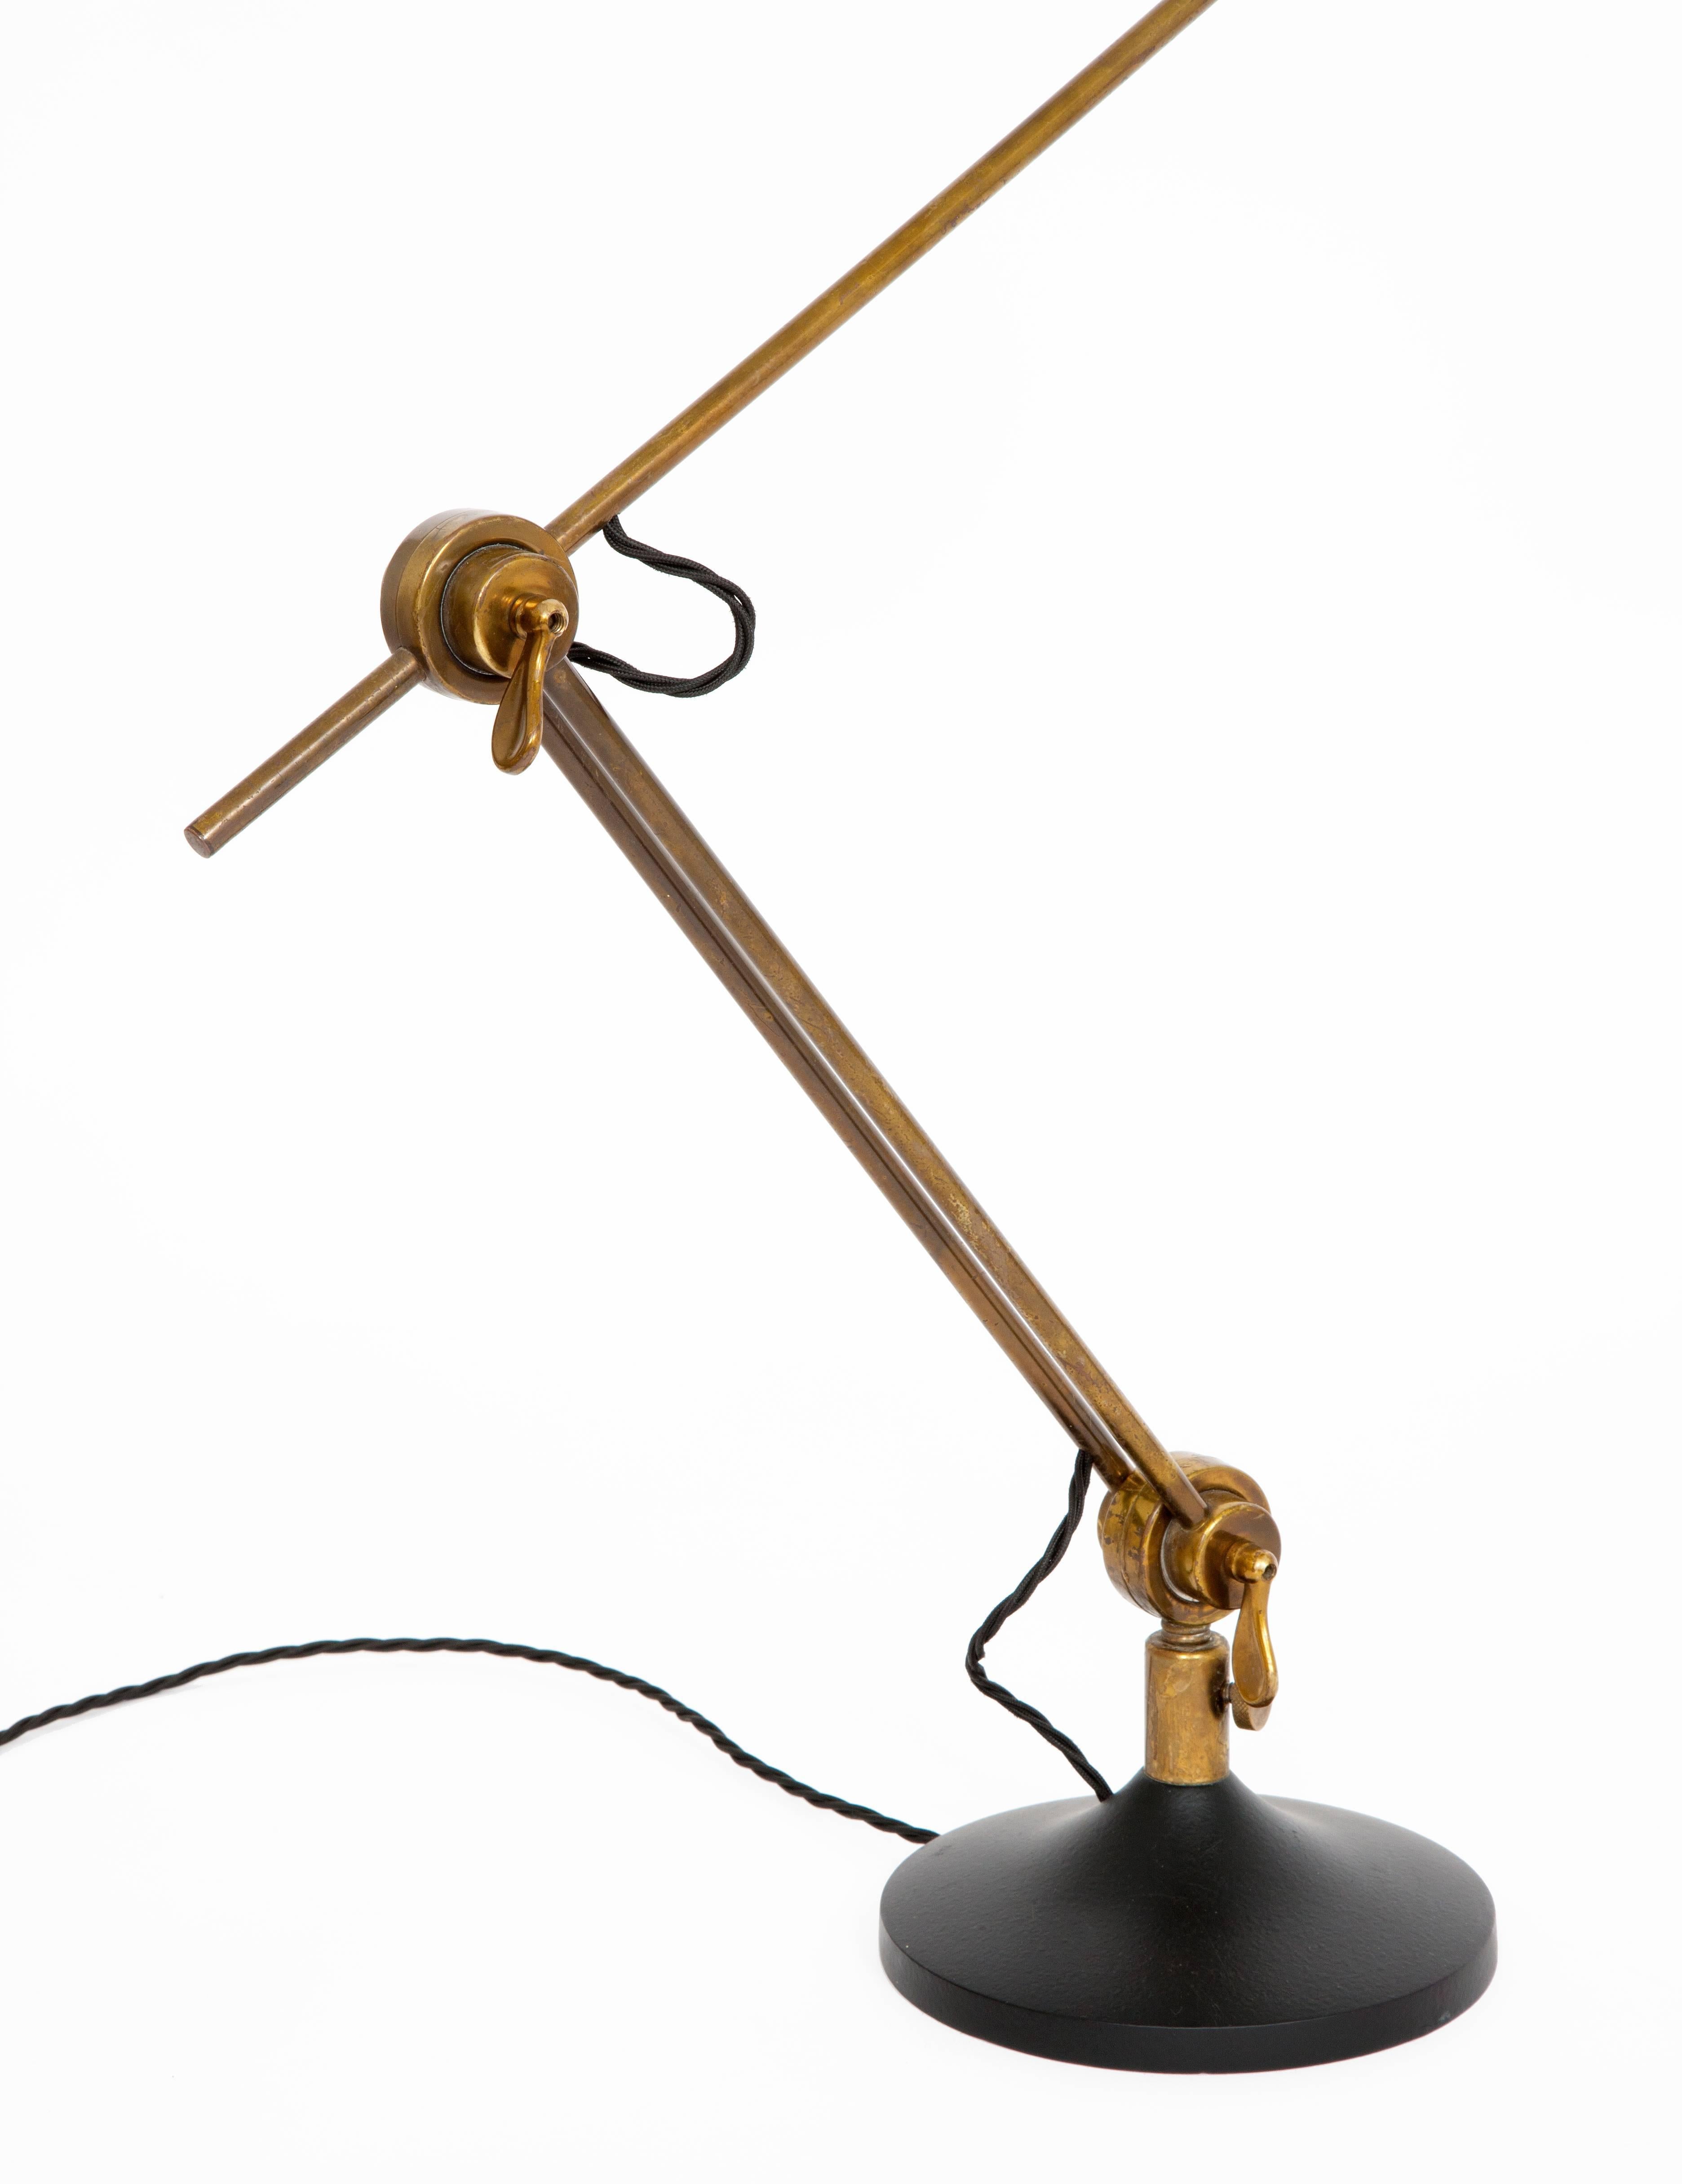 Rare table lamp by Stilnovo in brass and painted metal with an adjustable jointed arm which rotates fully on the base. 
Italy, 1950s.
Dimensions: H: 70 cm W: 59 cm (shade L: 20 cm D: 10 cm).